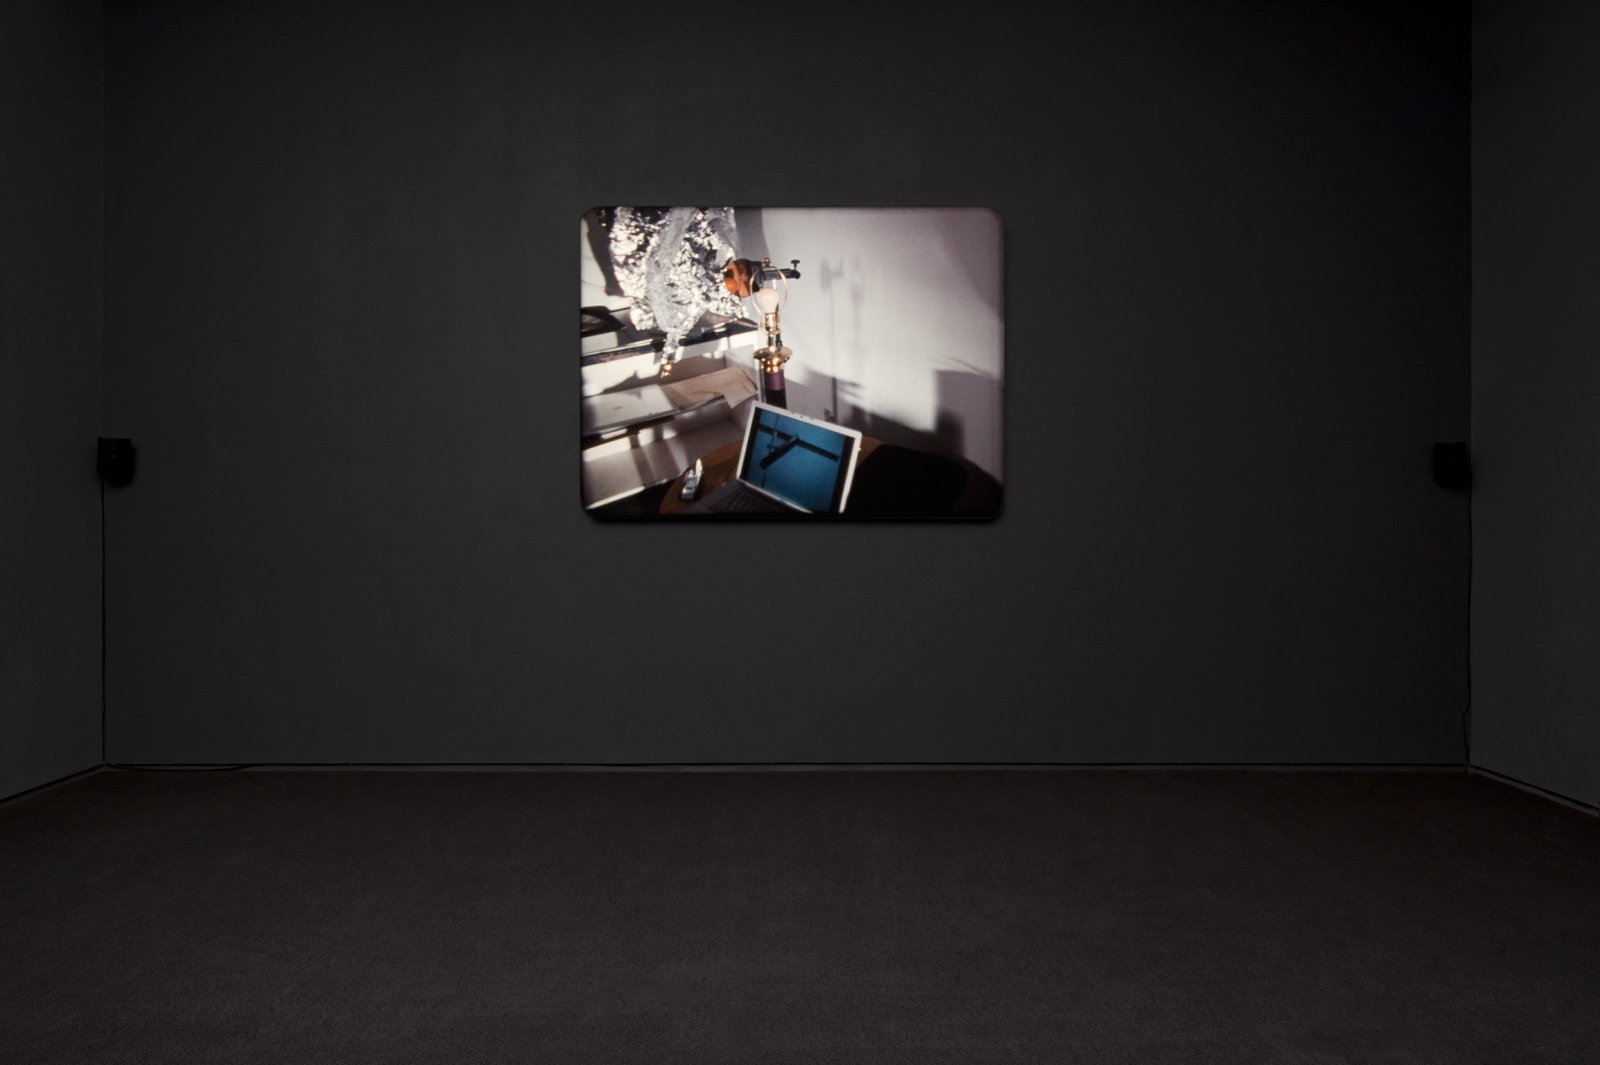 ​Julia Feyrer, The artist’s studio, 2010, colour 16mm film loop with non-synchronized sound, 5 minutes, 5 seconds by Julia Feyrer